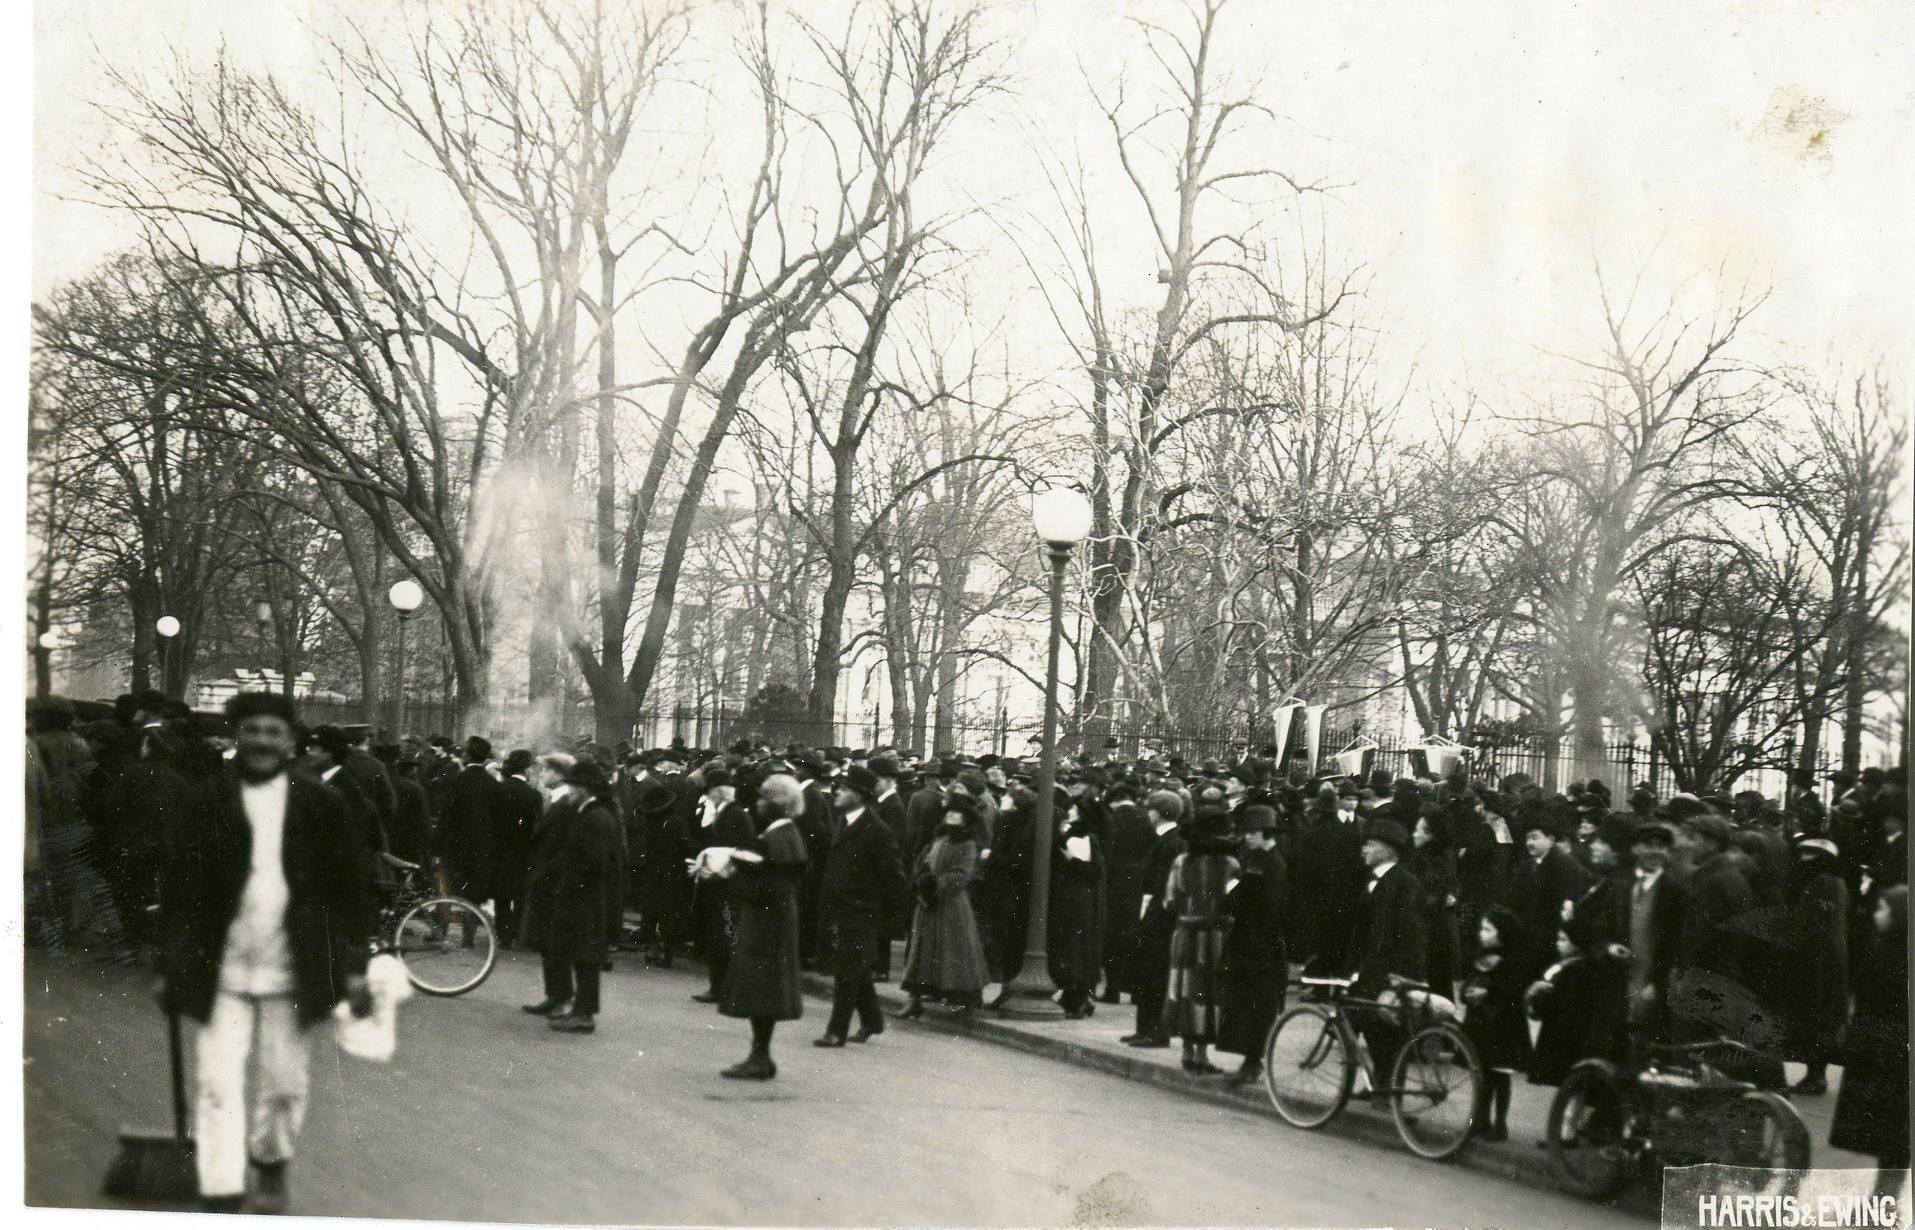 Watchfires protests in 1919